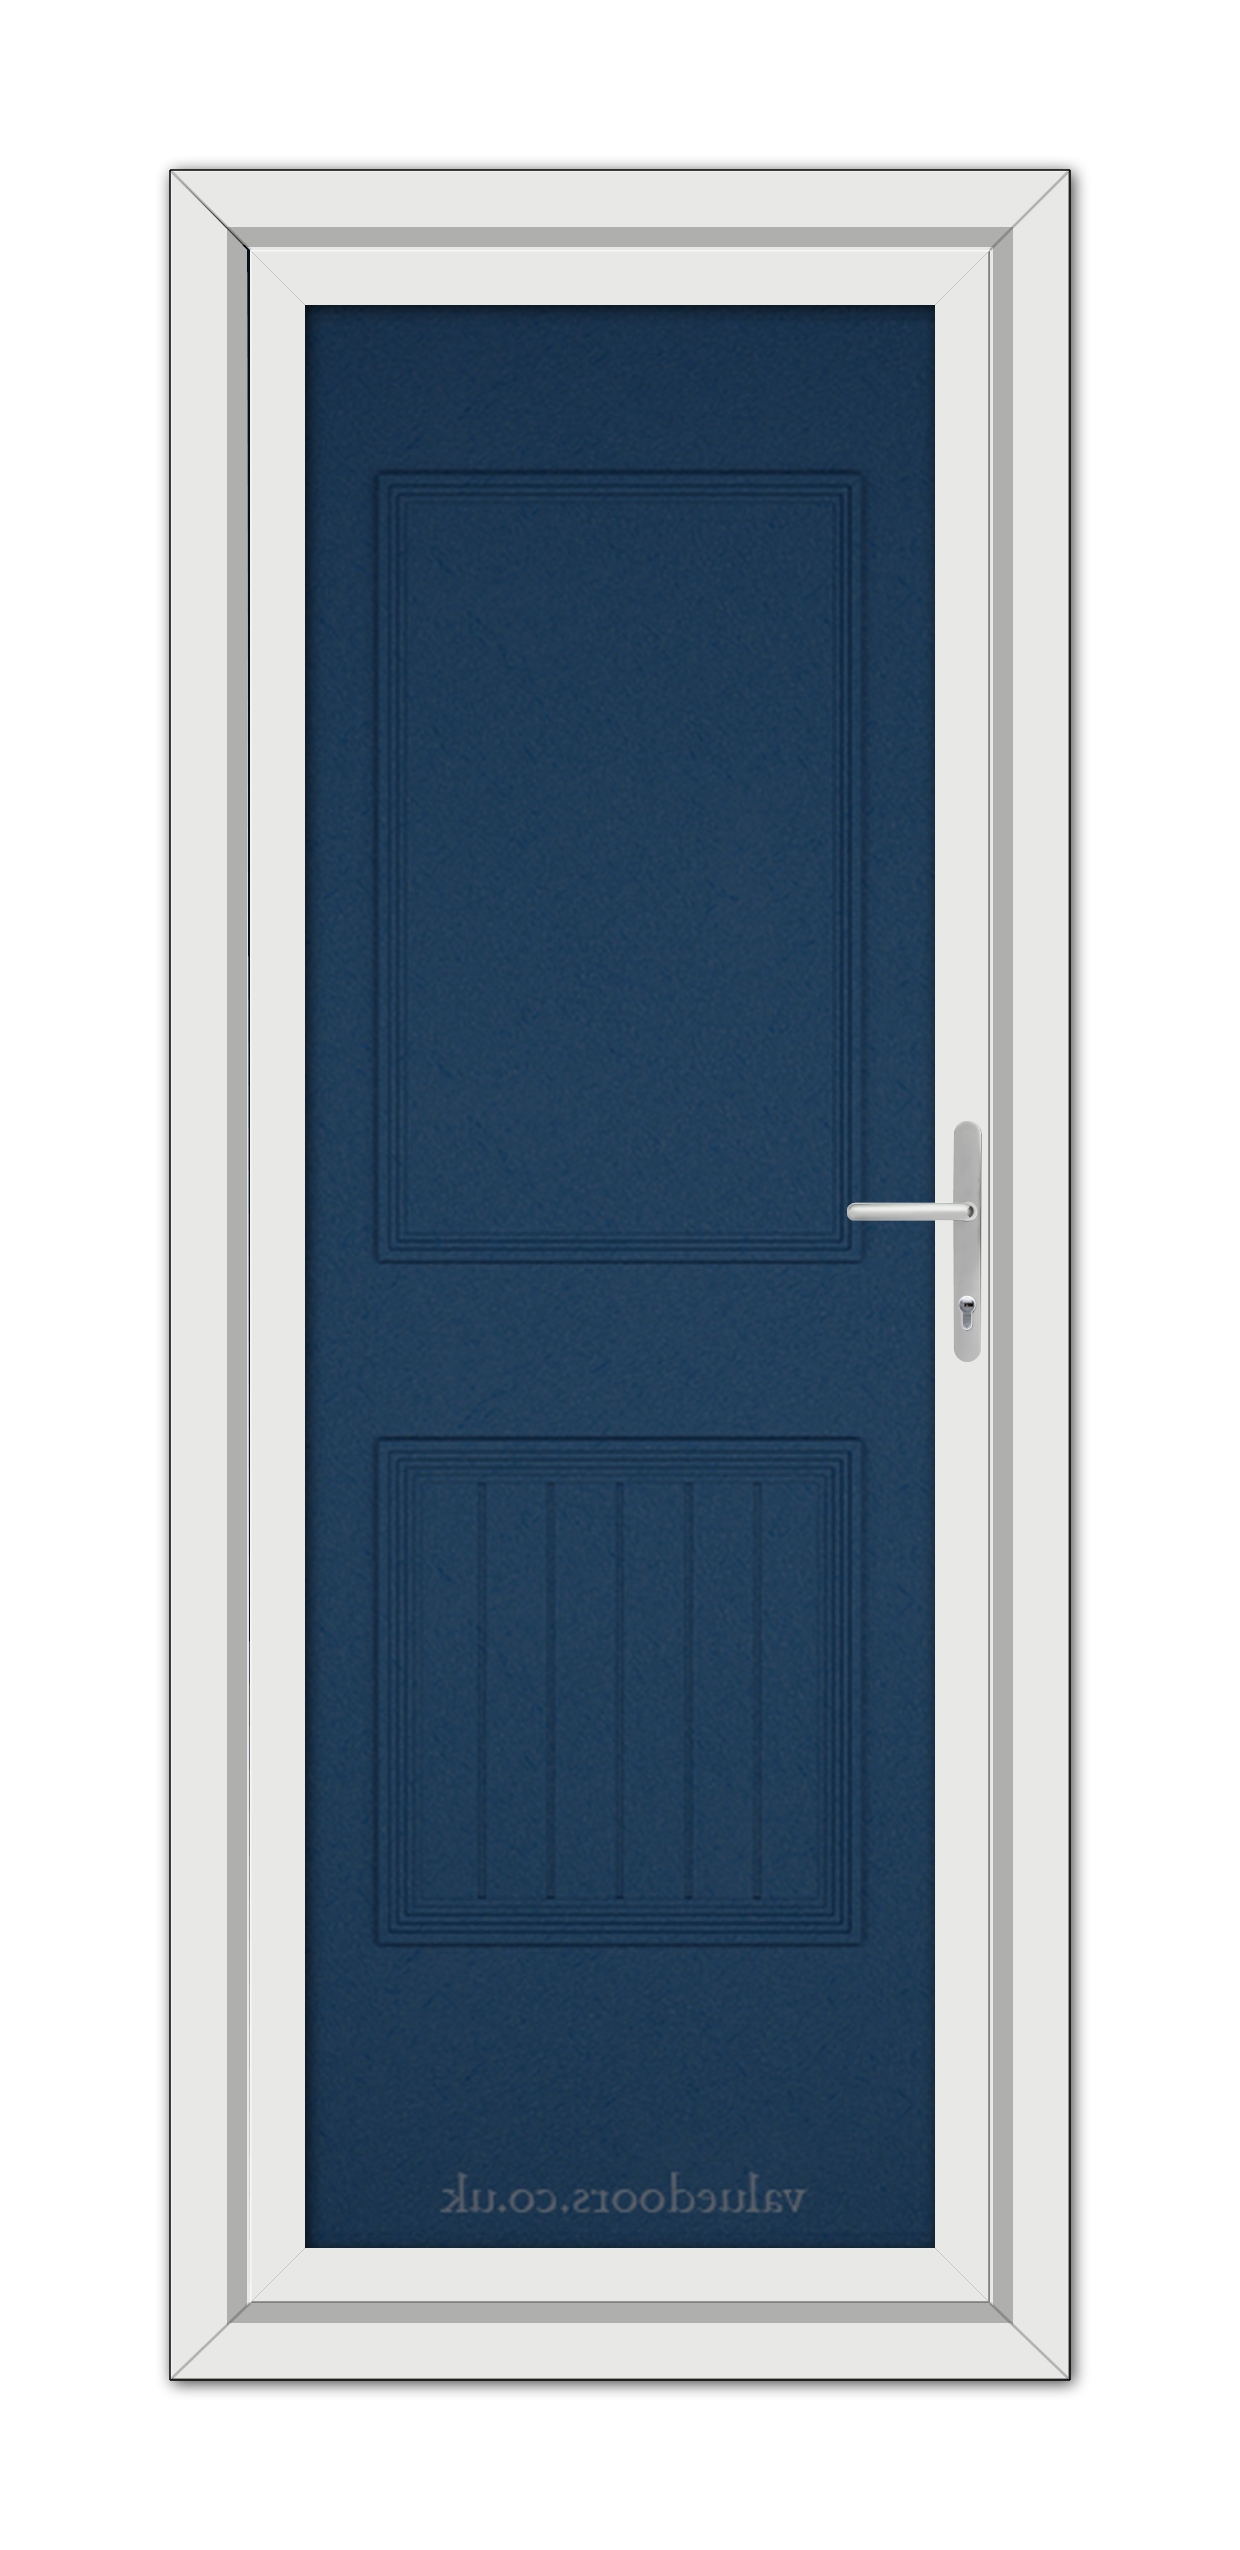 A Blue Alnwick One Solid uPVC Door with a white frame and a silver handle, featuring an upside-down text at the bottom.